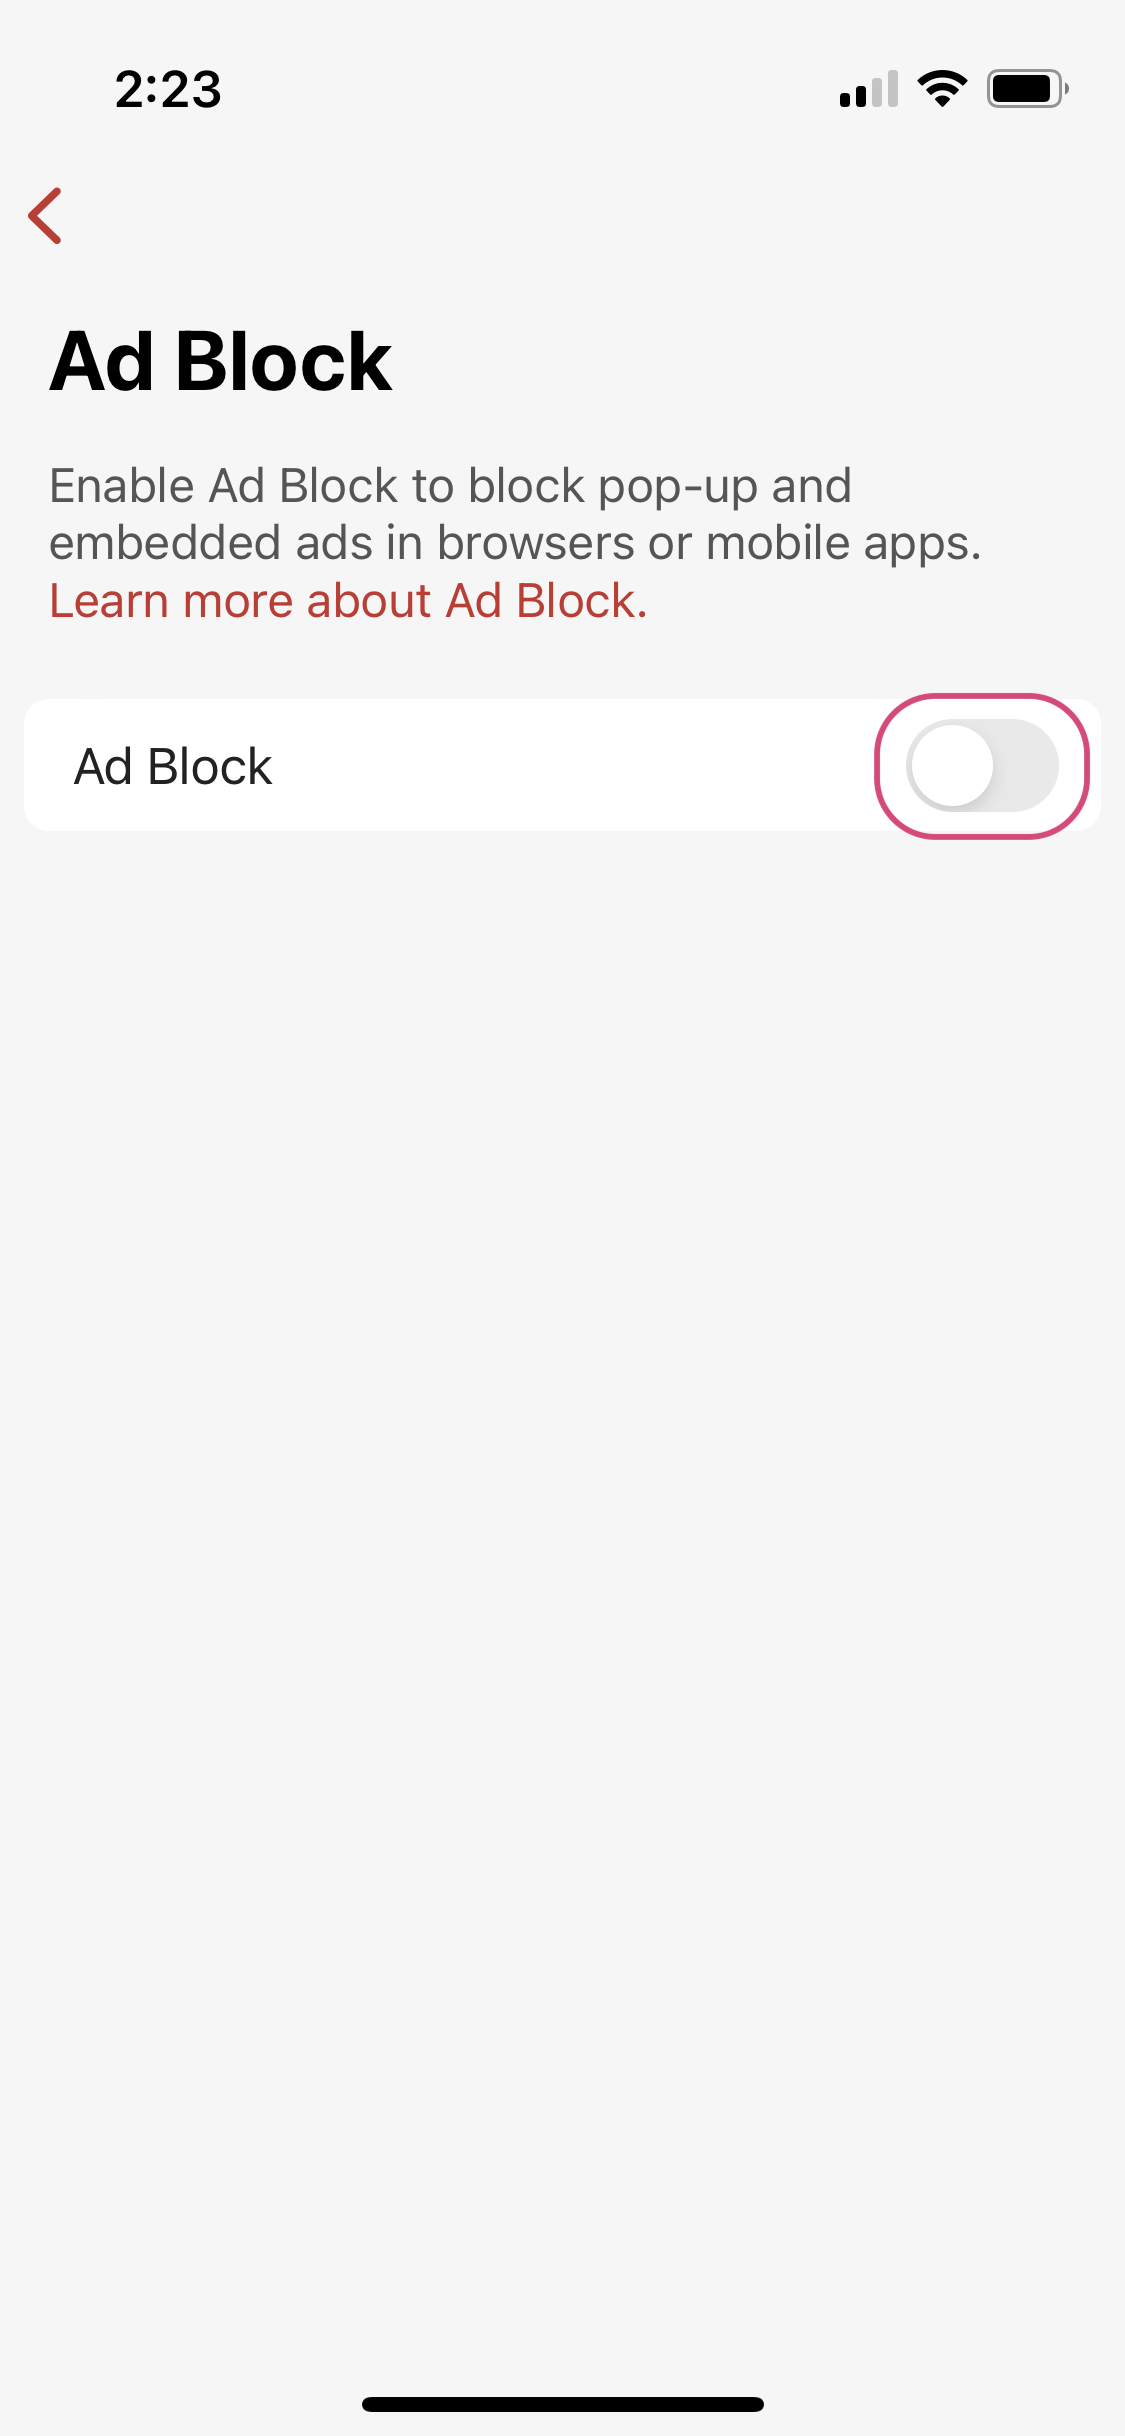 Turn the Ad Block option on within the Firewalla app